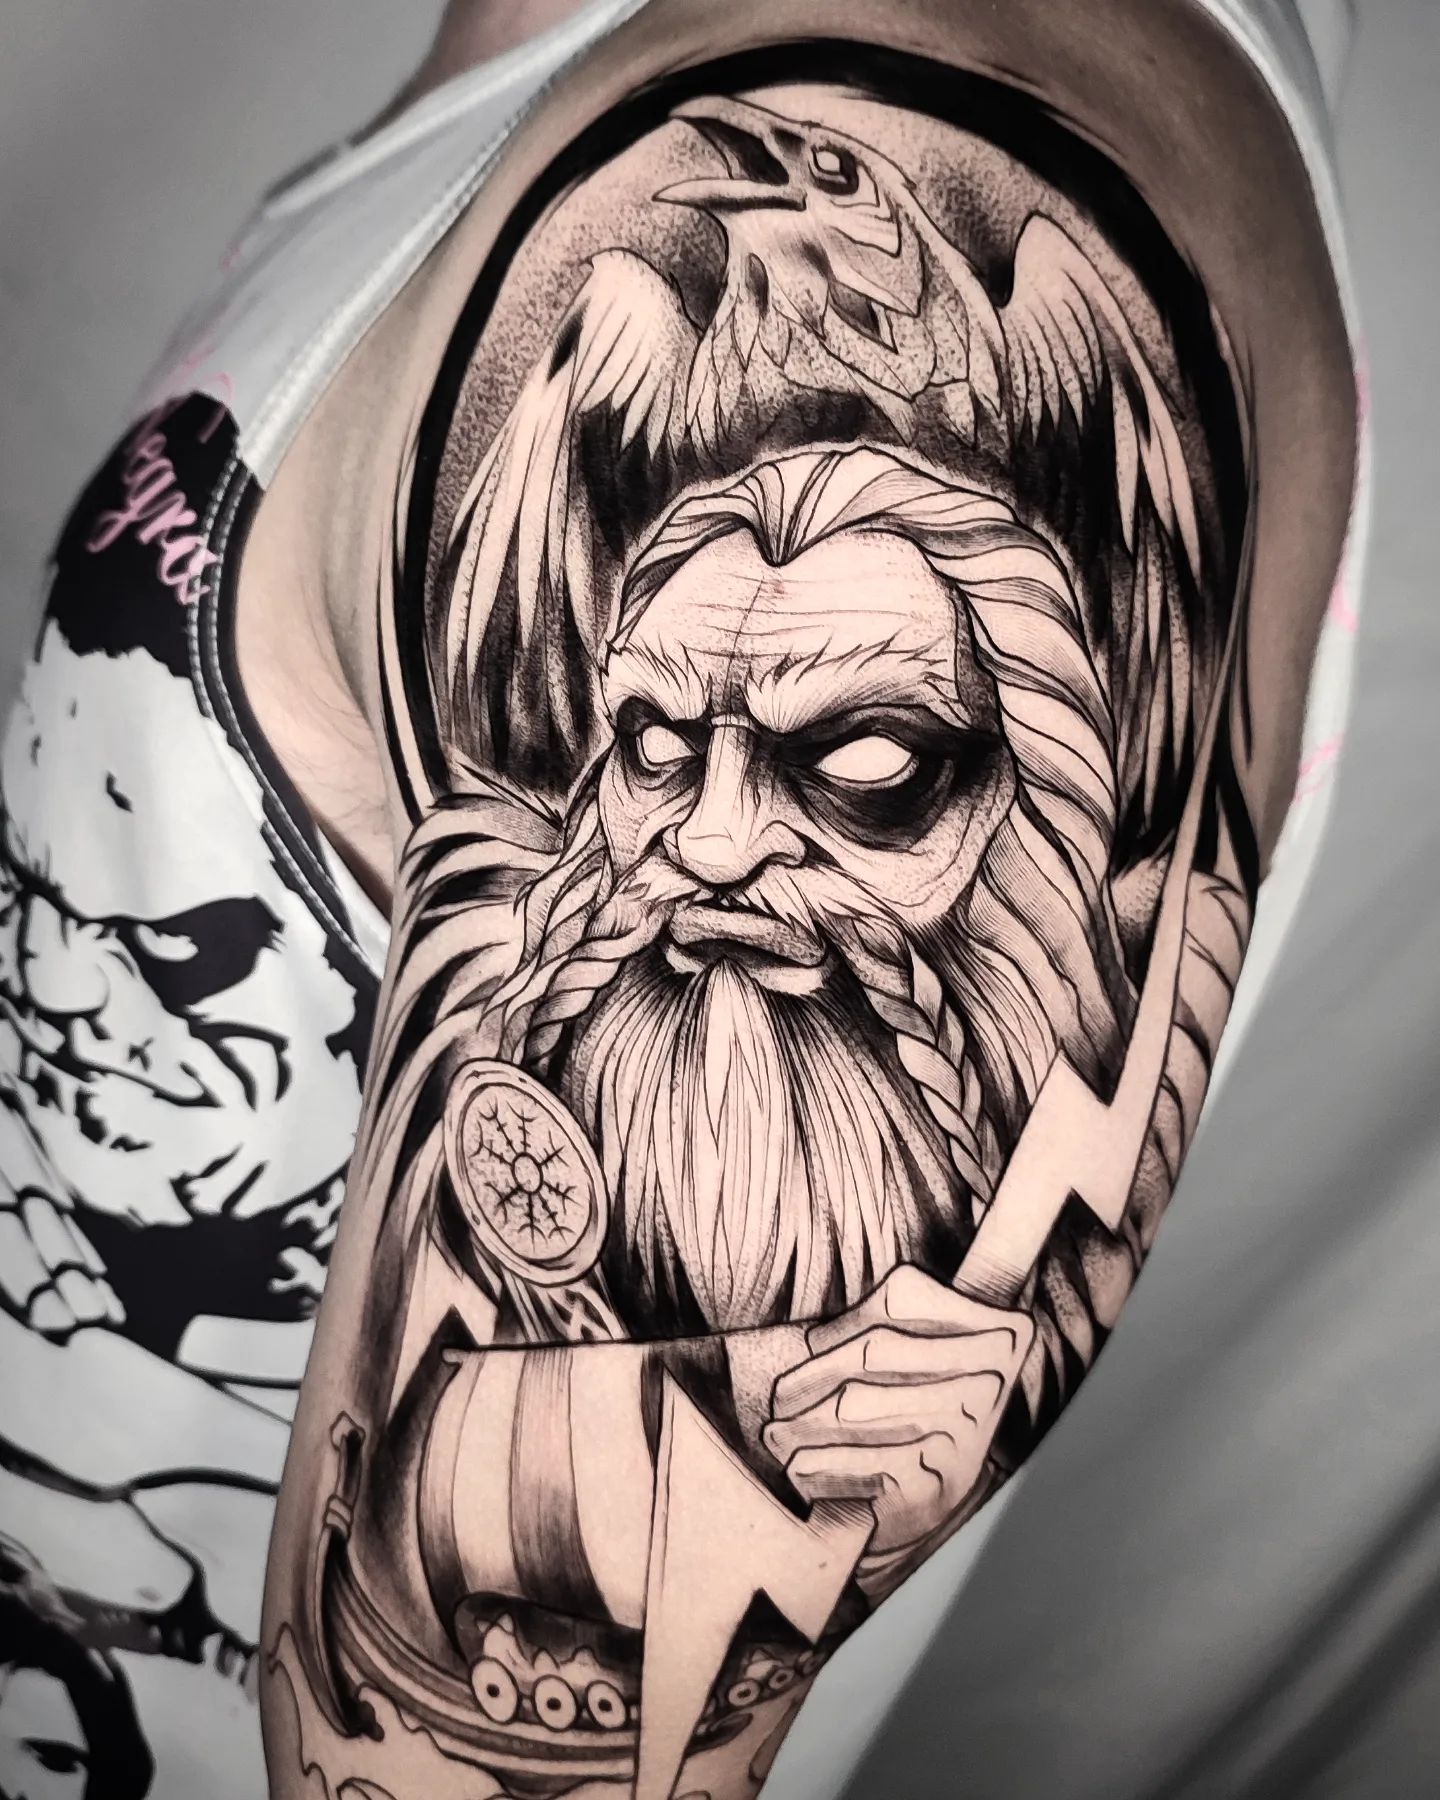 This Thor tattoo will be a great choice if you are a fan of Norse mythology. You will feel the power of Thor with this tattoo, for sure.